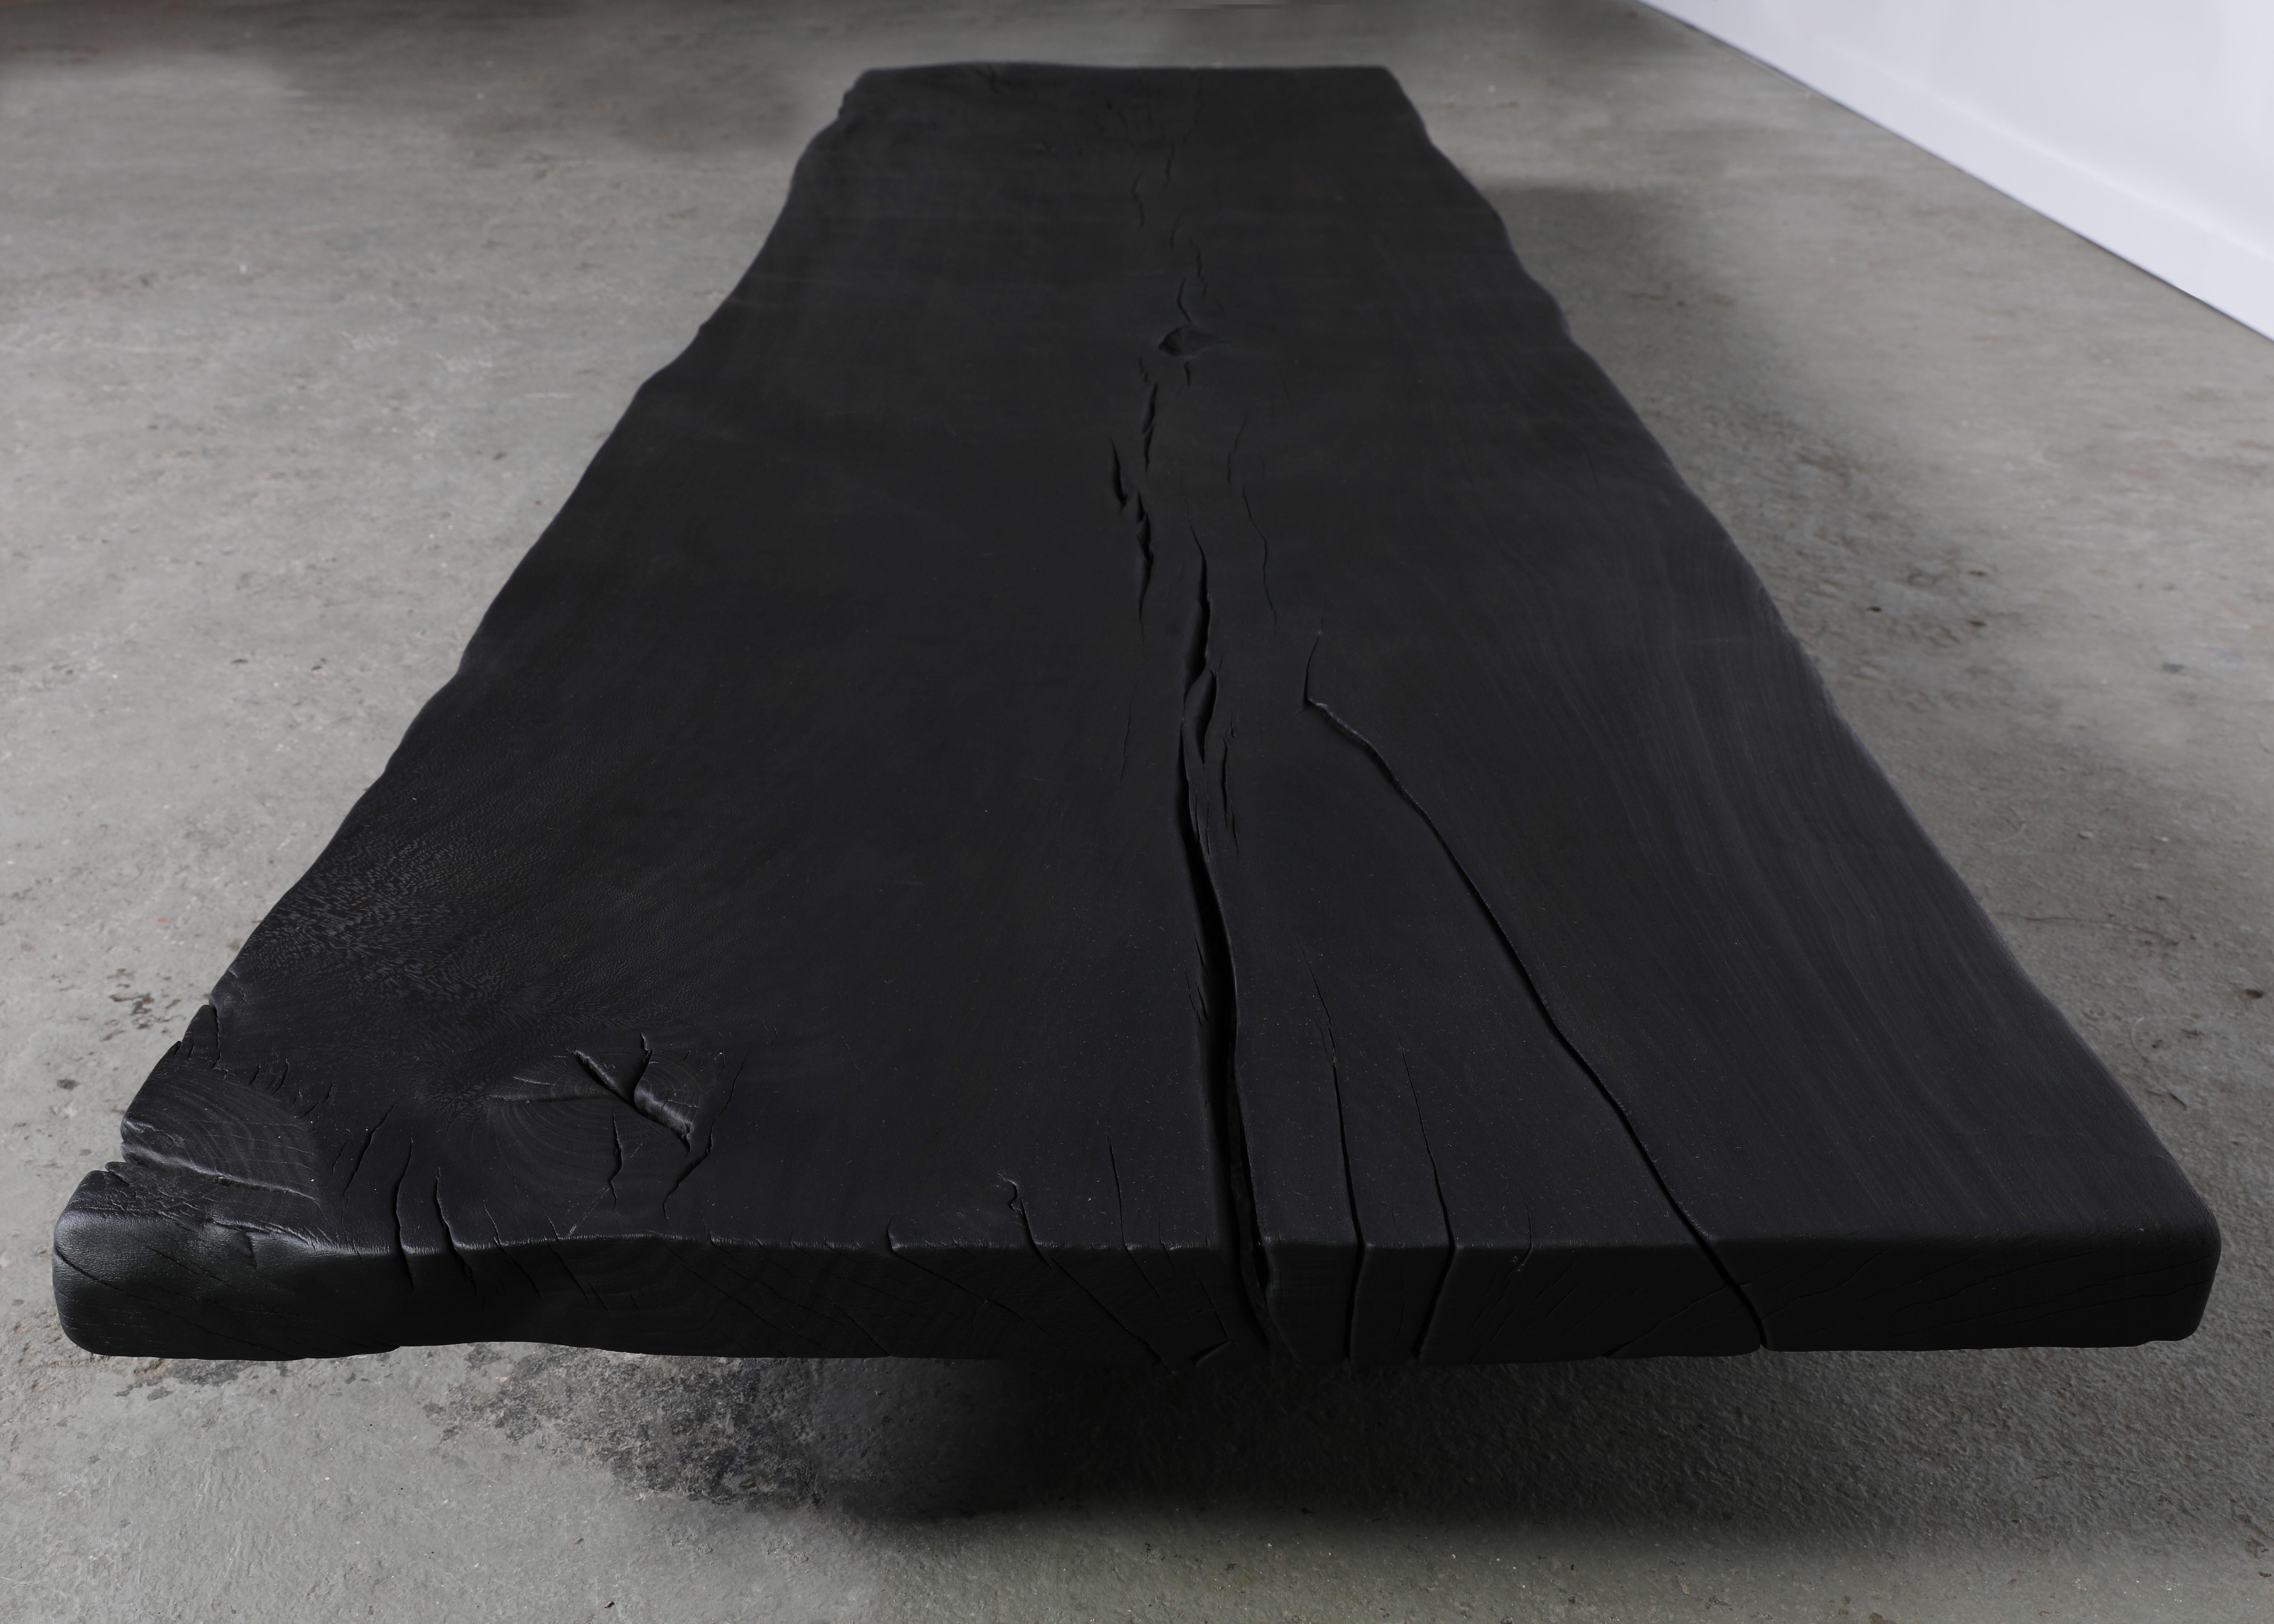 Wabi-sabi is an ancient Japanese philosophy. It embraces simplicity, natural materials, irregularities and asymmetry. In wabi it is believed that beauty lies in imperfection. This inspired the design of the Burned Coffee Table. A table that is